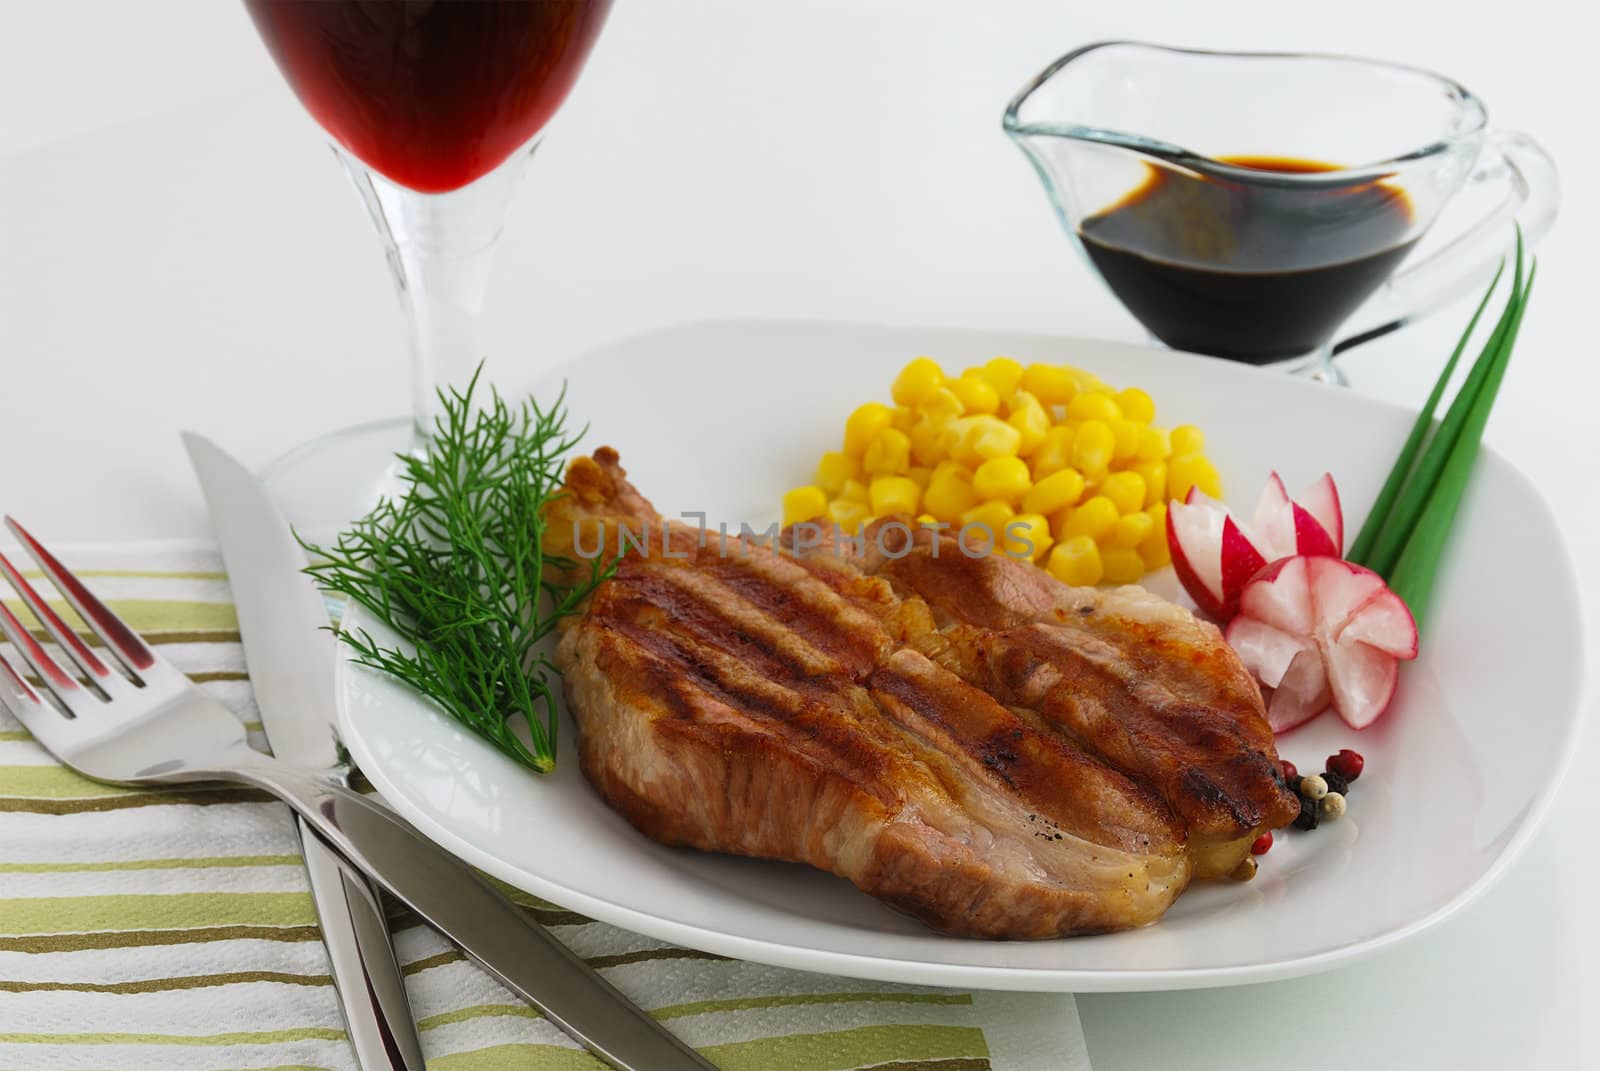 Steak dish garnished by corn, radish and dill served with wine and sauce